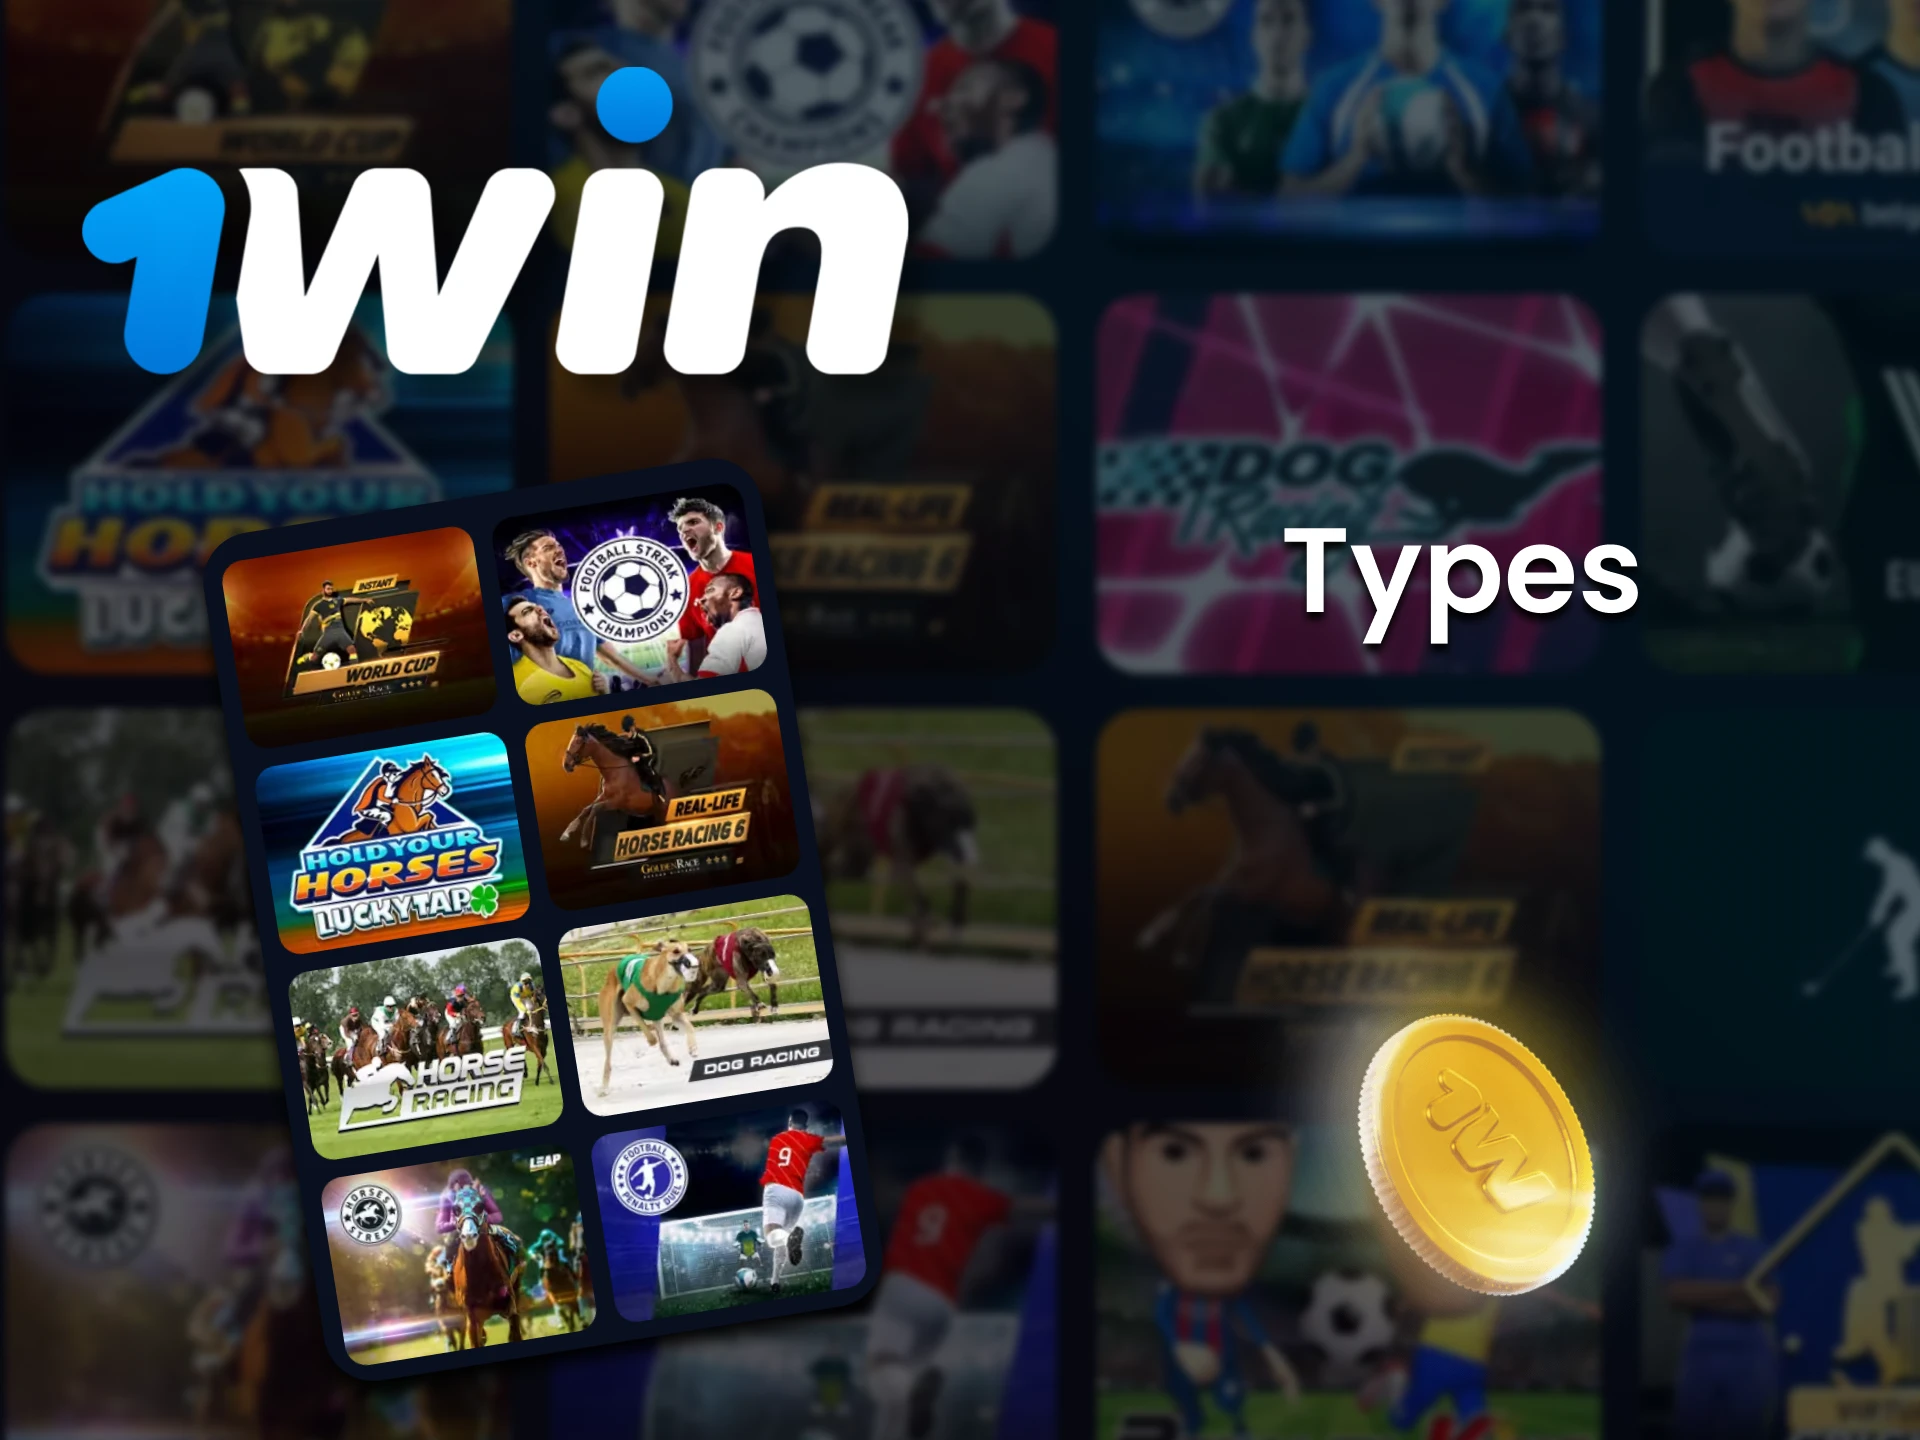 Find out about Vsports types that are available at 1Win.